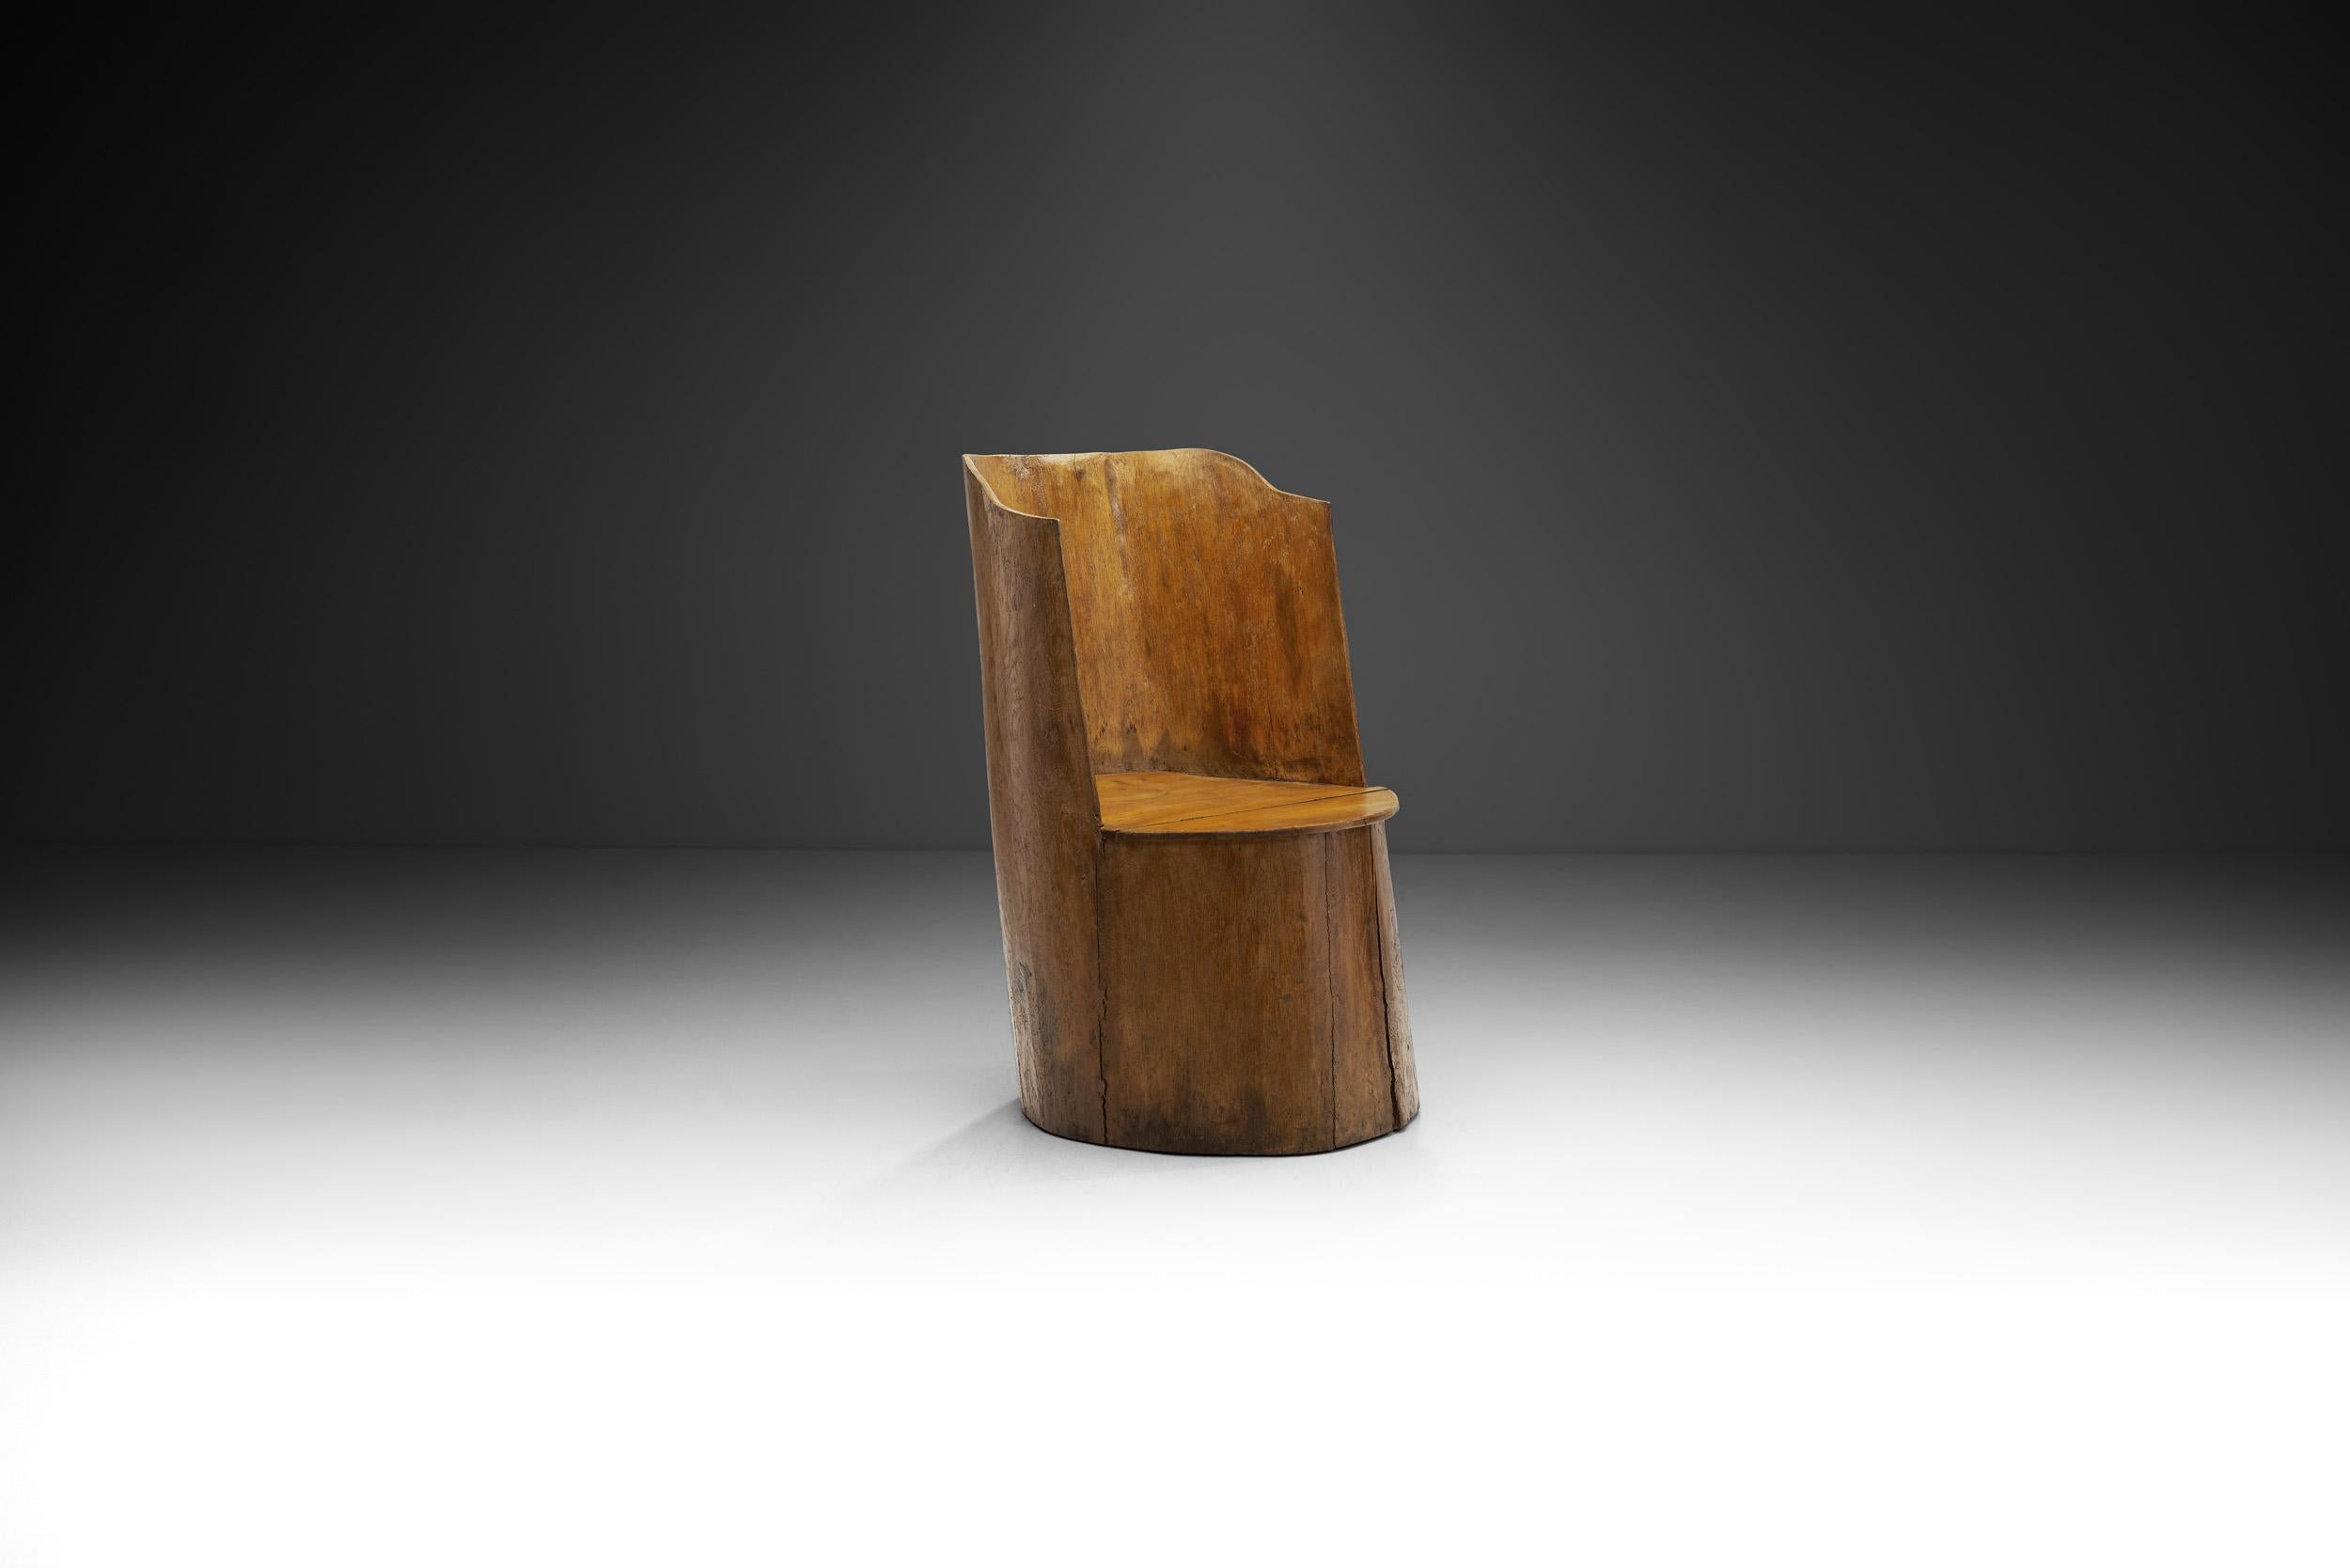 In Norway, cube chairs have been in use since the Middle Ages, and in the 18th and 19th centuries, cube chairs were mostly used in the farming communities in Eastern and Southern Norway.

Kubbestol or cube chair is traditionally carved out of a